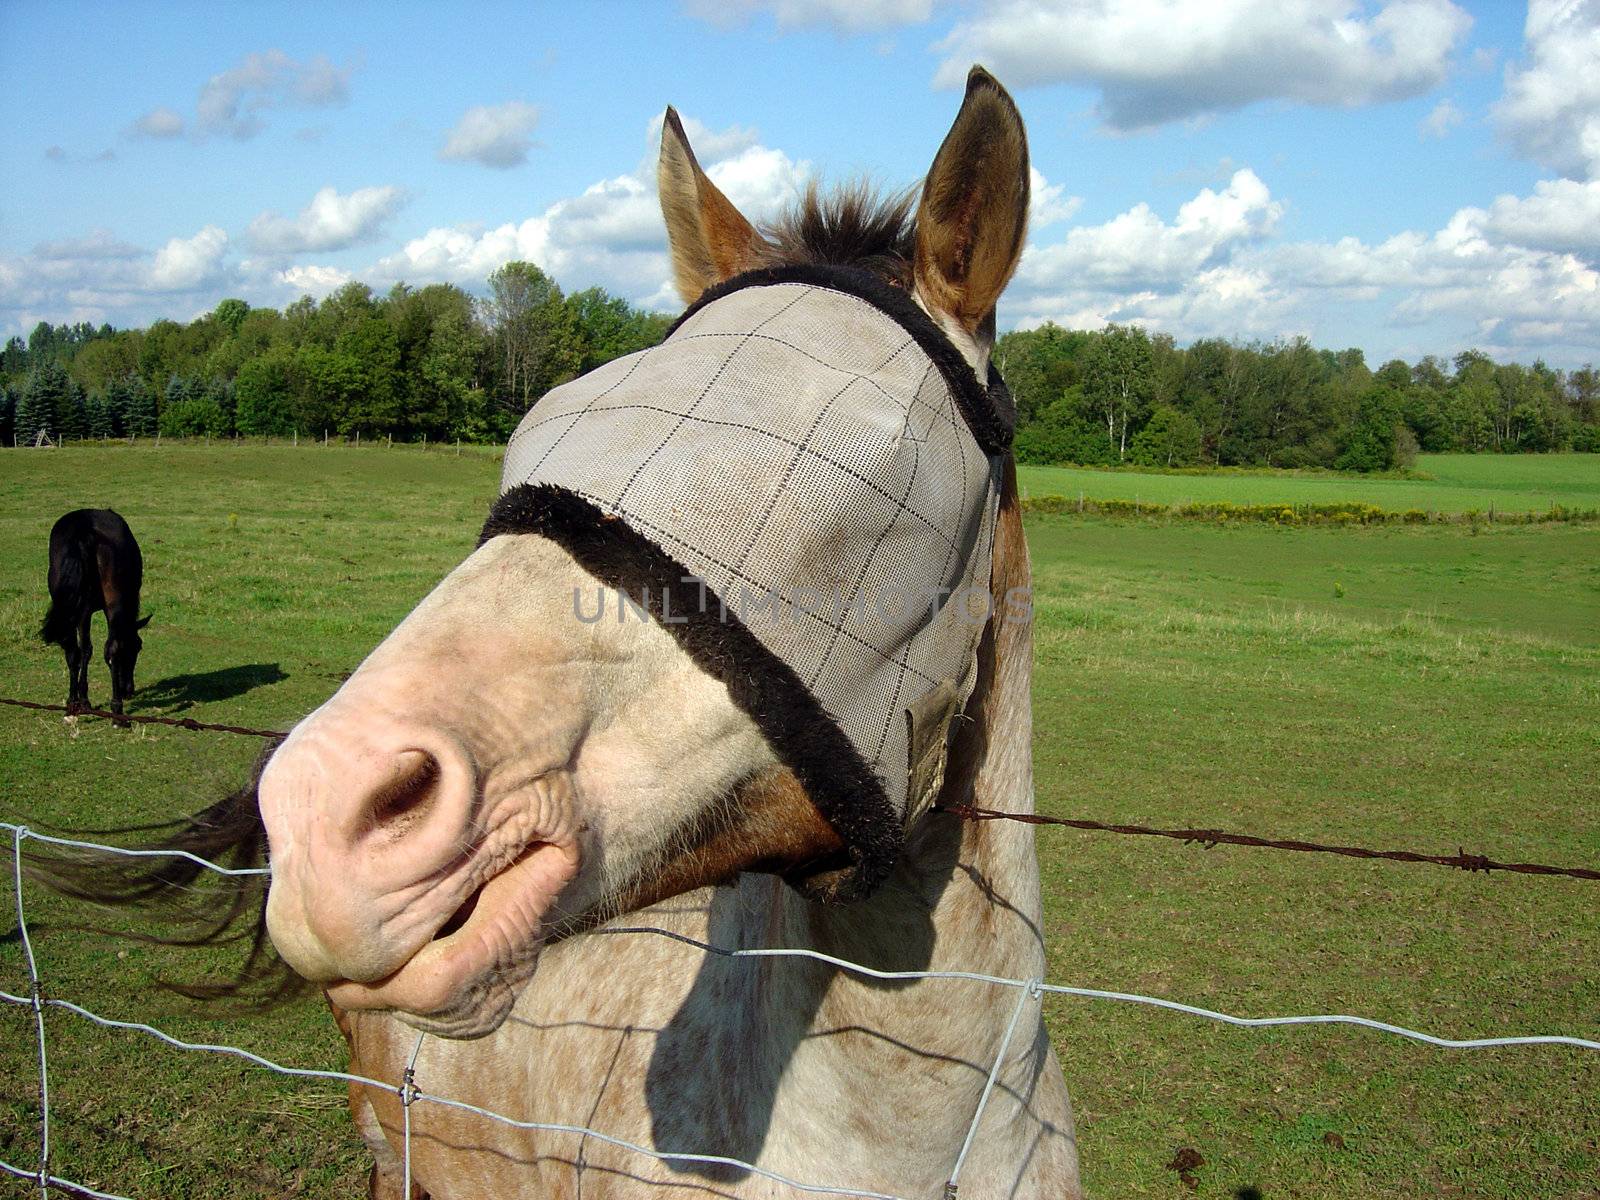 A horse with a burlap sack covering it's eyes.
